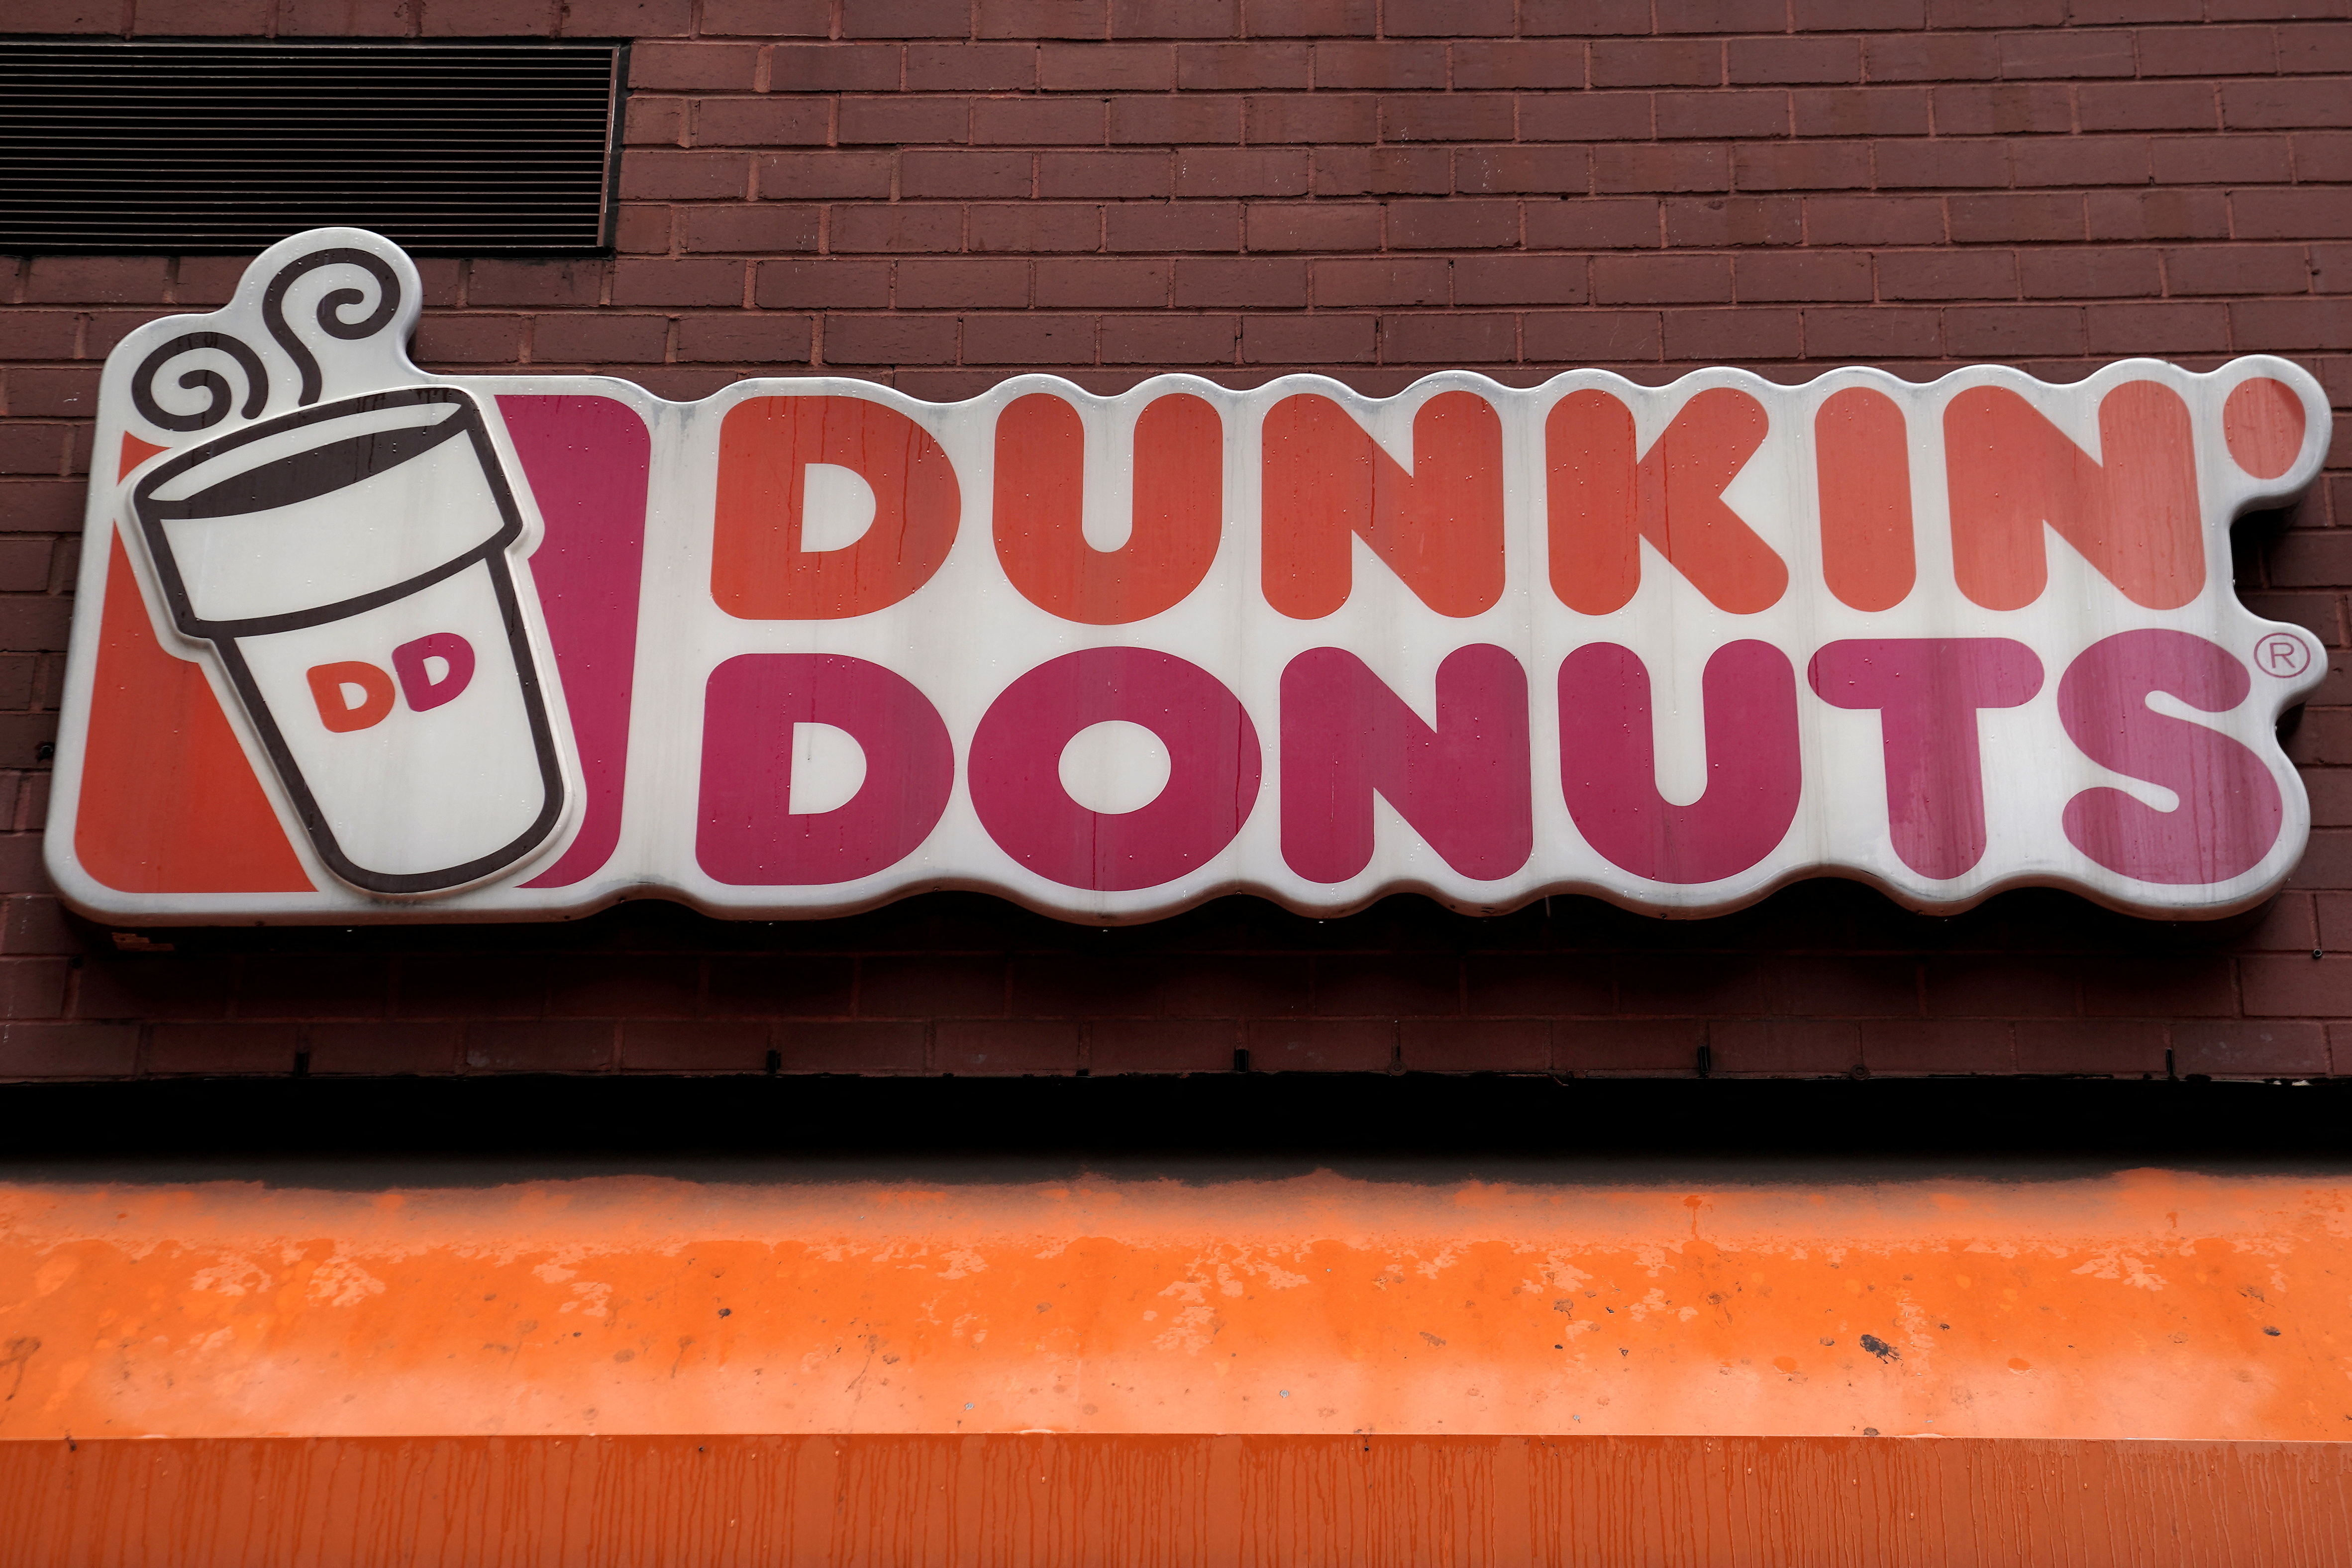 A Dunkin' Donuts logo is pictured